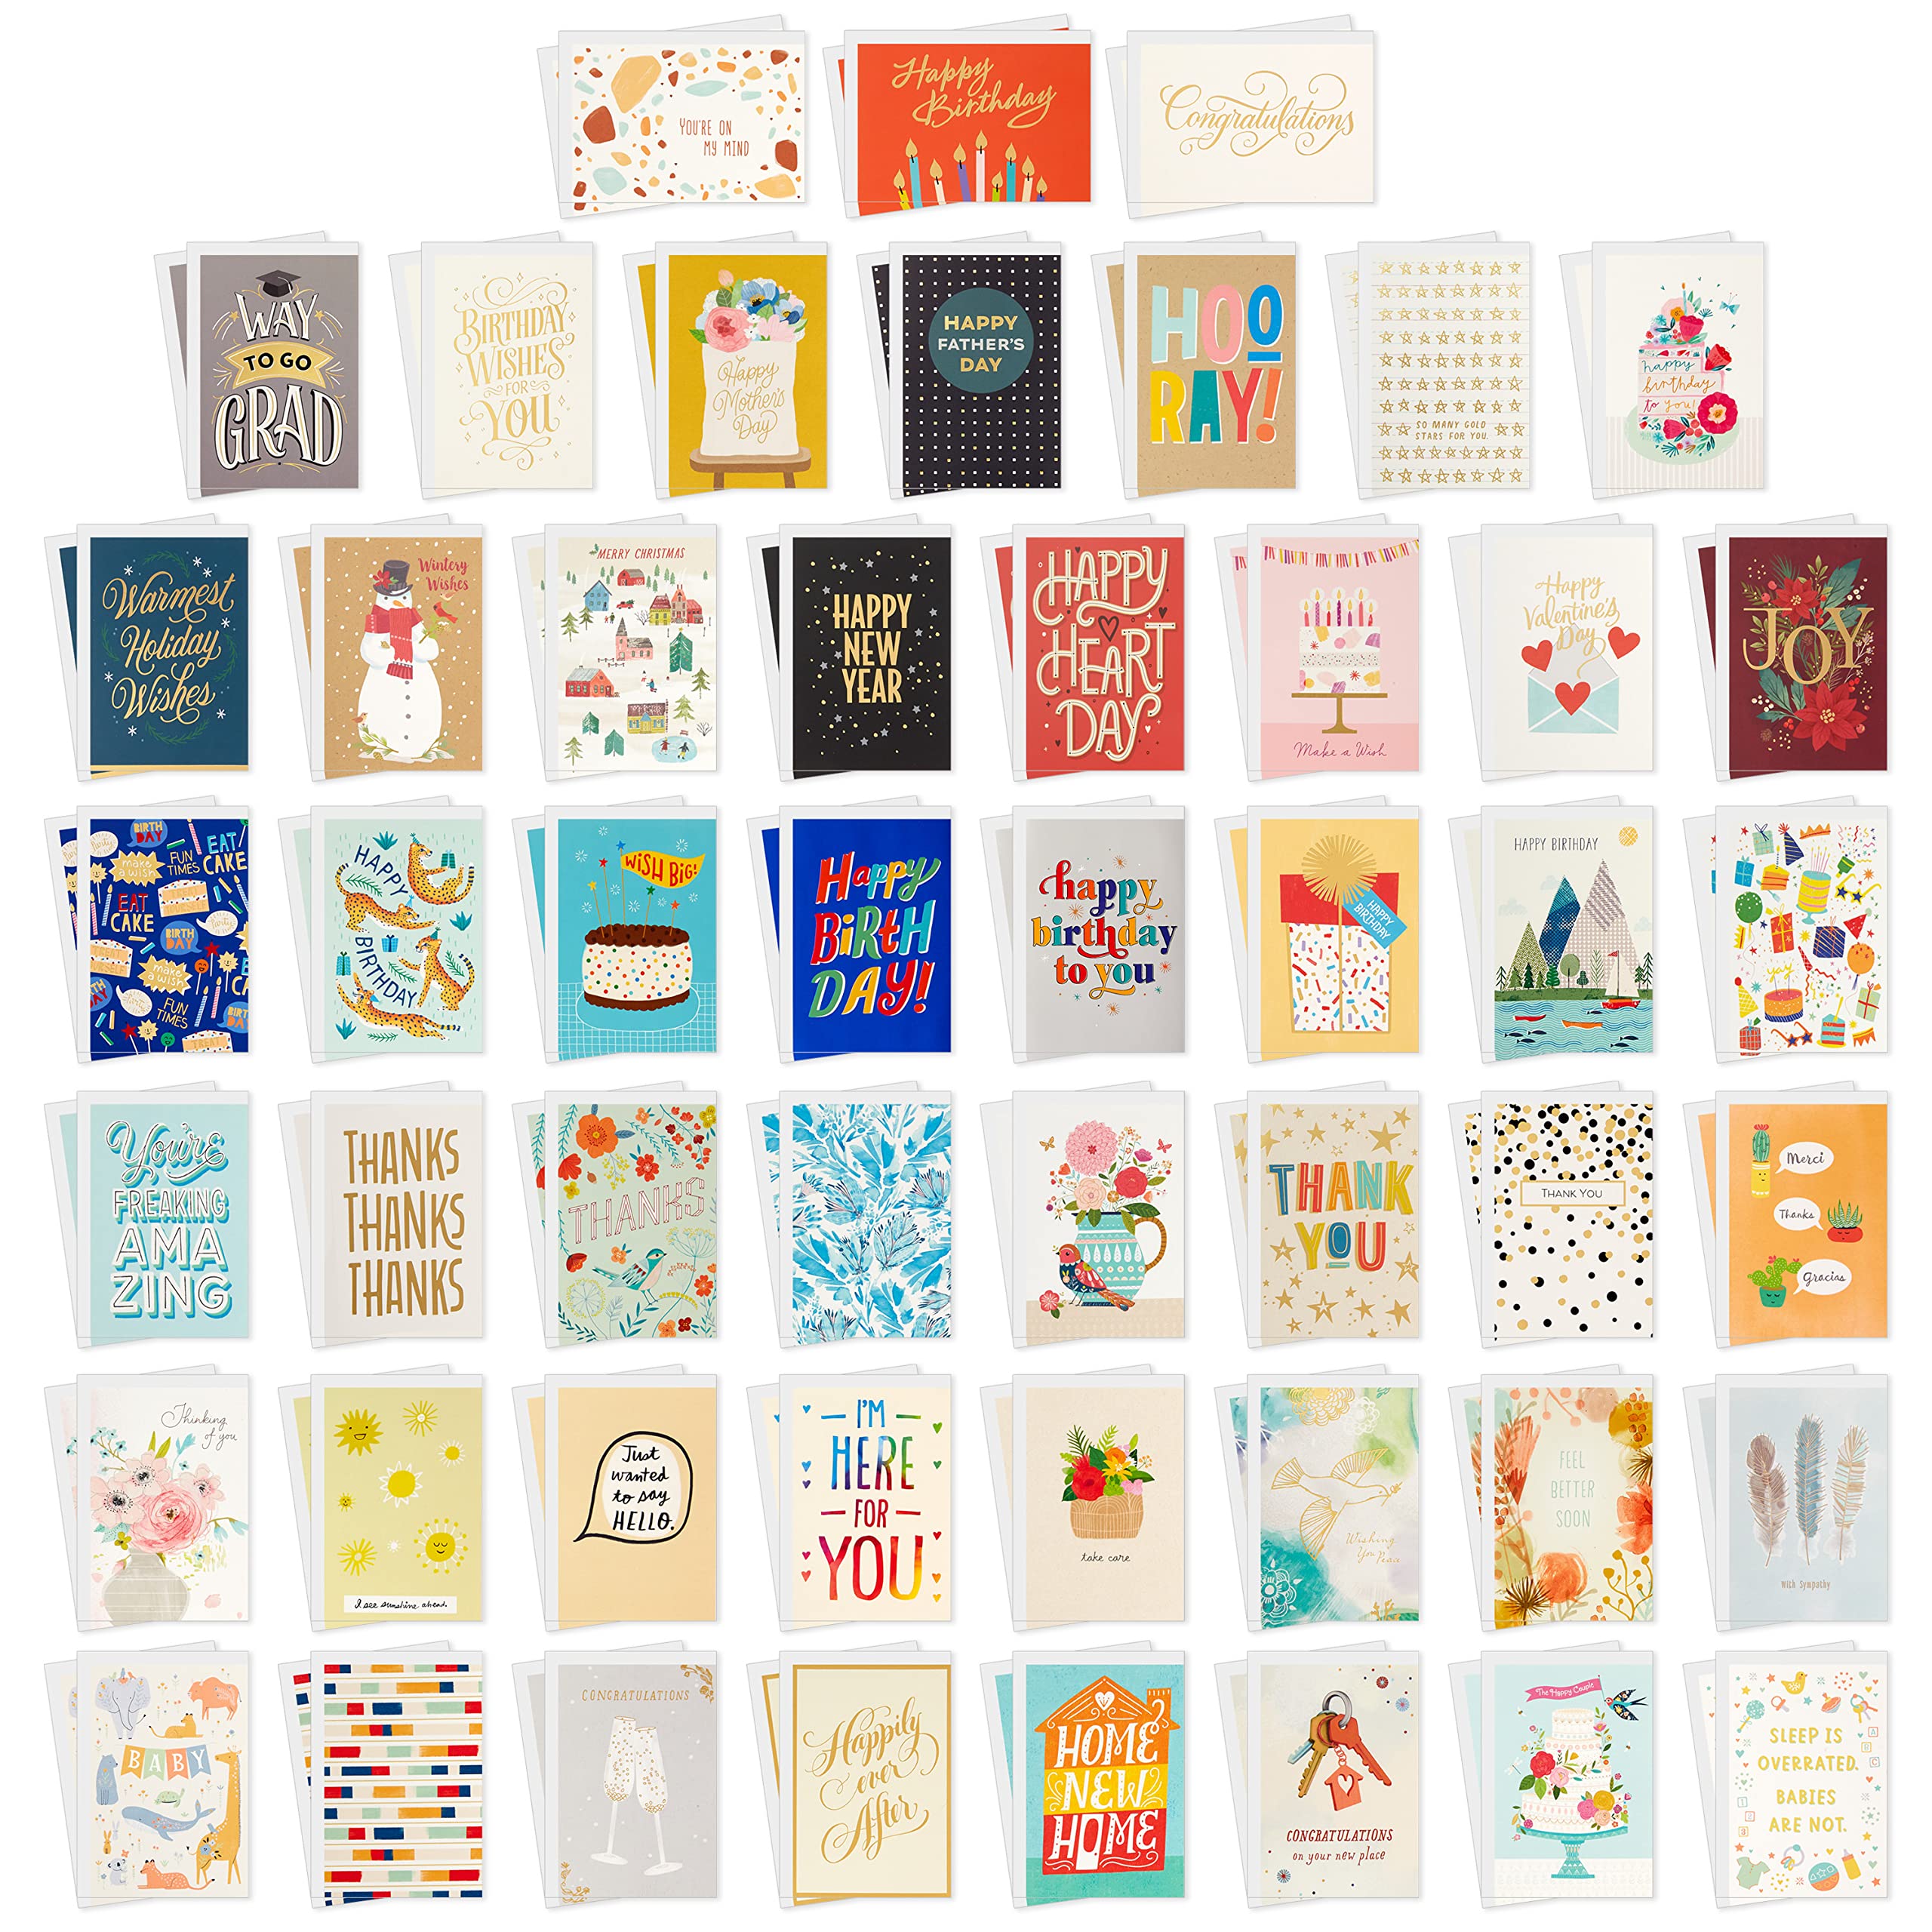 Hallmark All Occasion Boxed Set of Assorted Blank Greeting Cards with Card Organizer (Pack of 100)—Birthday, Thank You, Congratulations, Wedding, Baby, Thinking of You, Sympathy